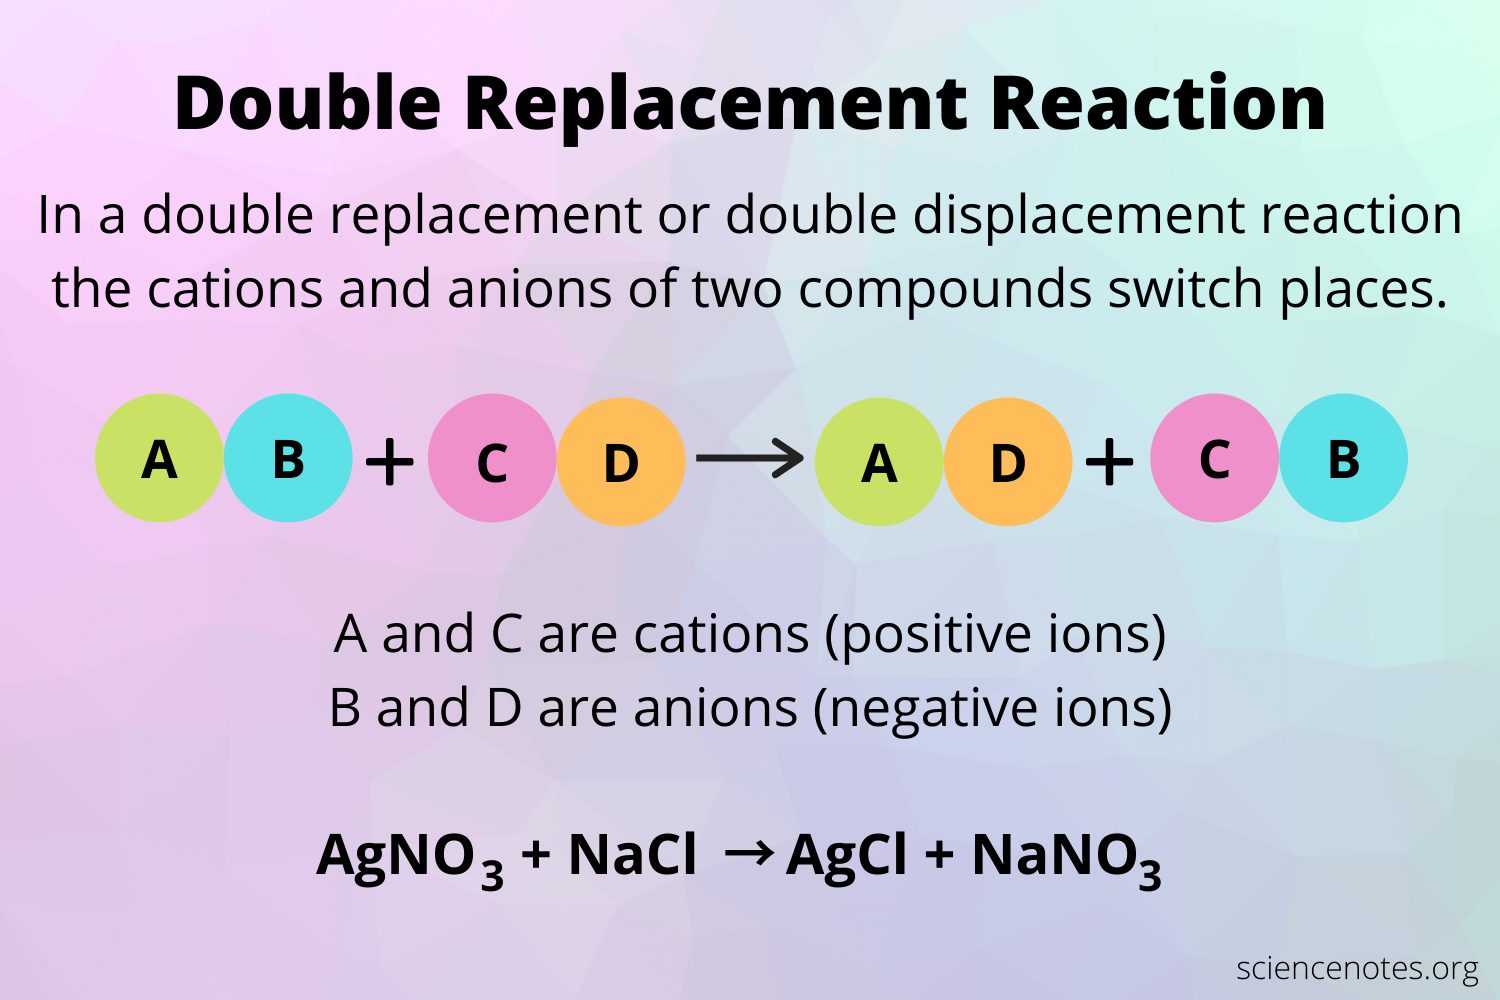 Double Replacement Reaction Definition and Examples